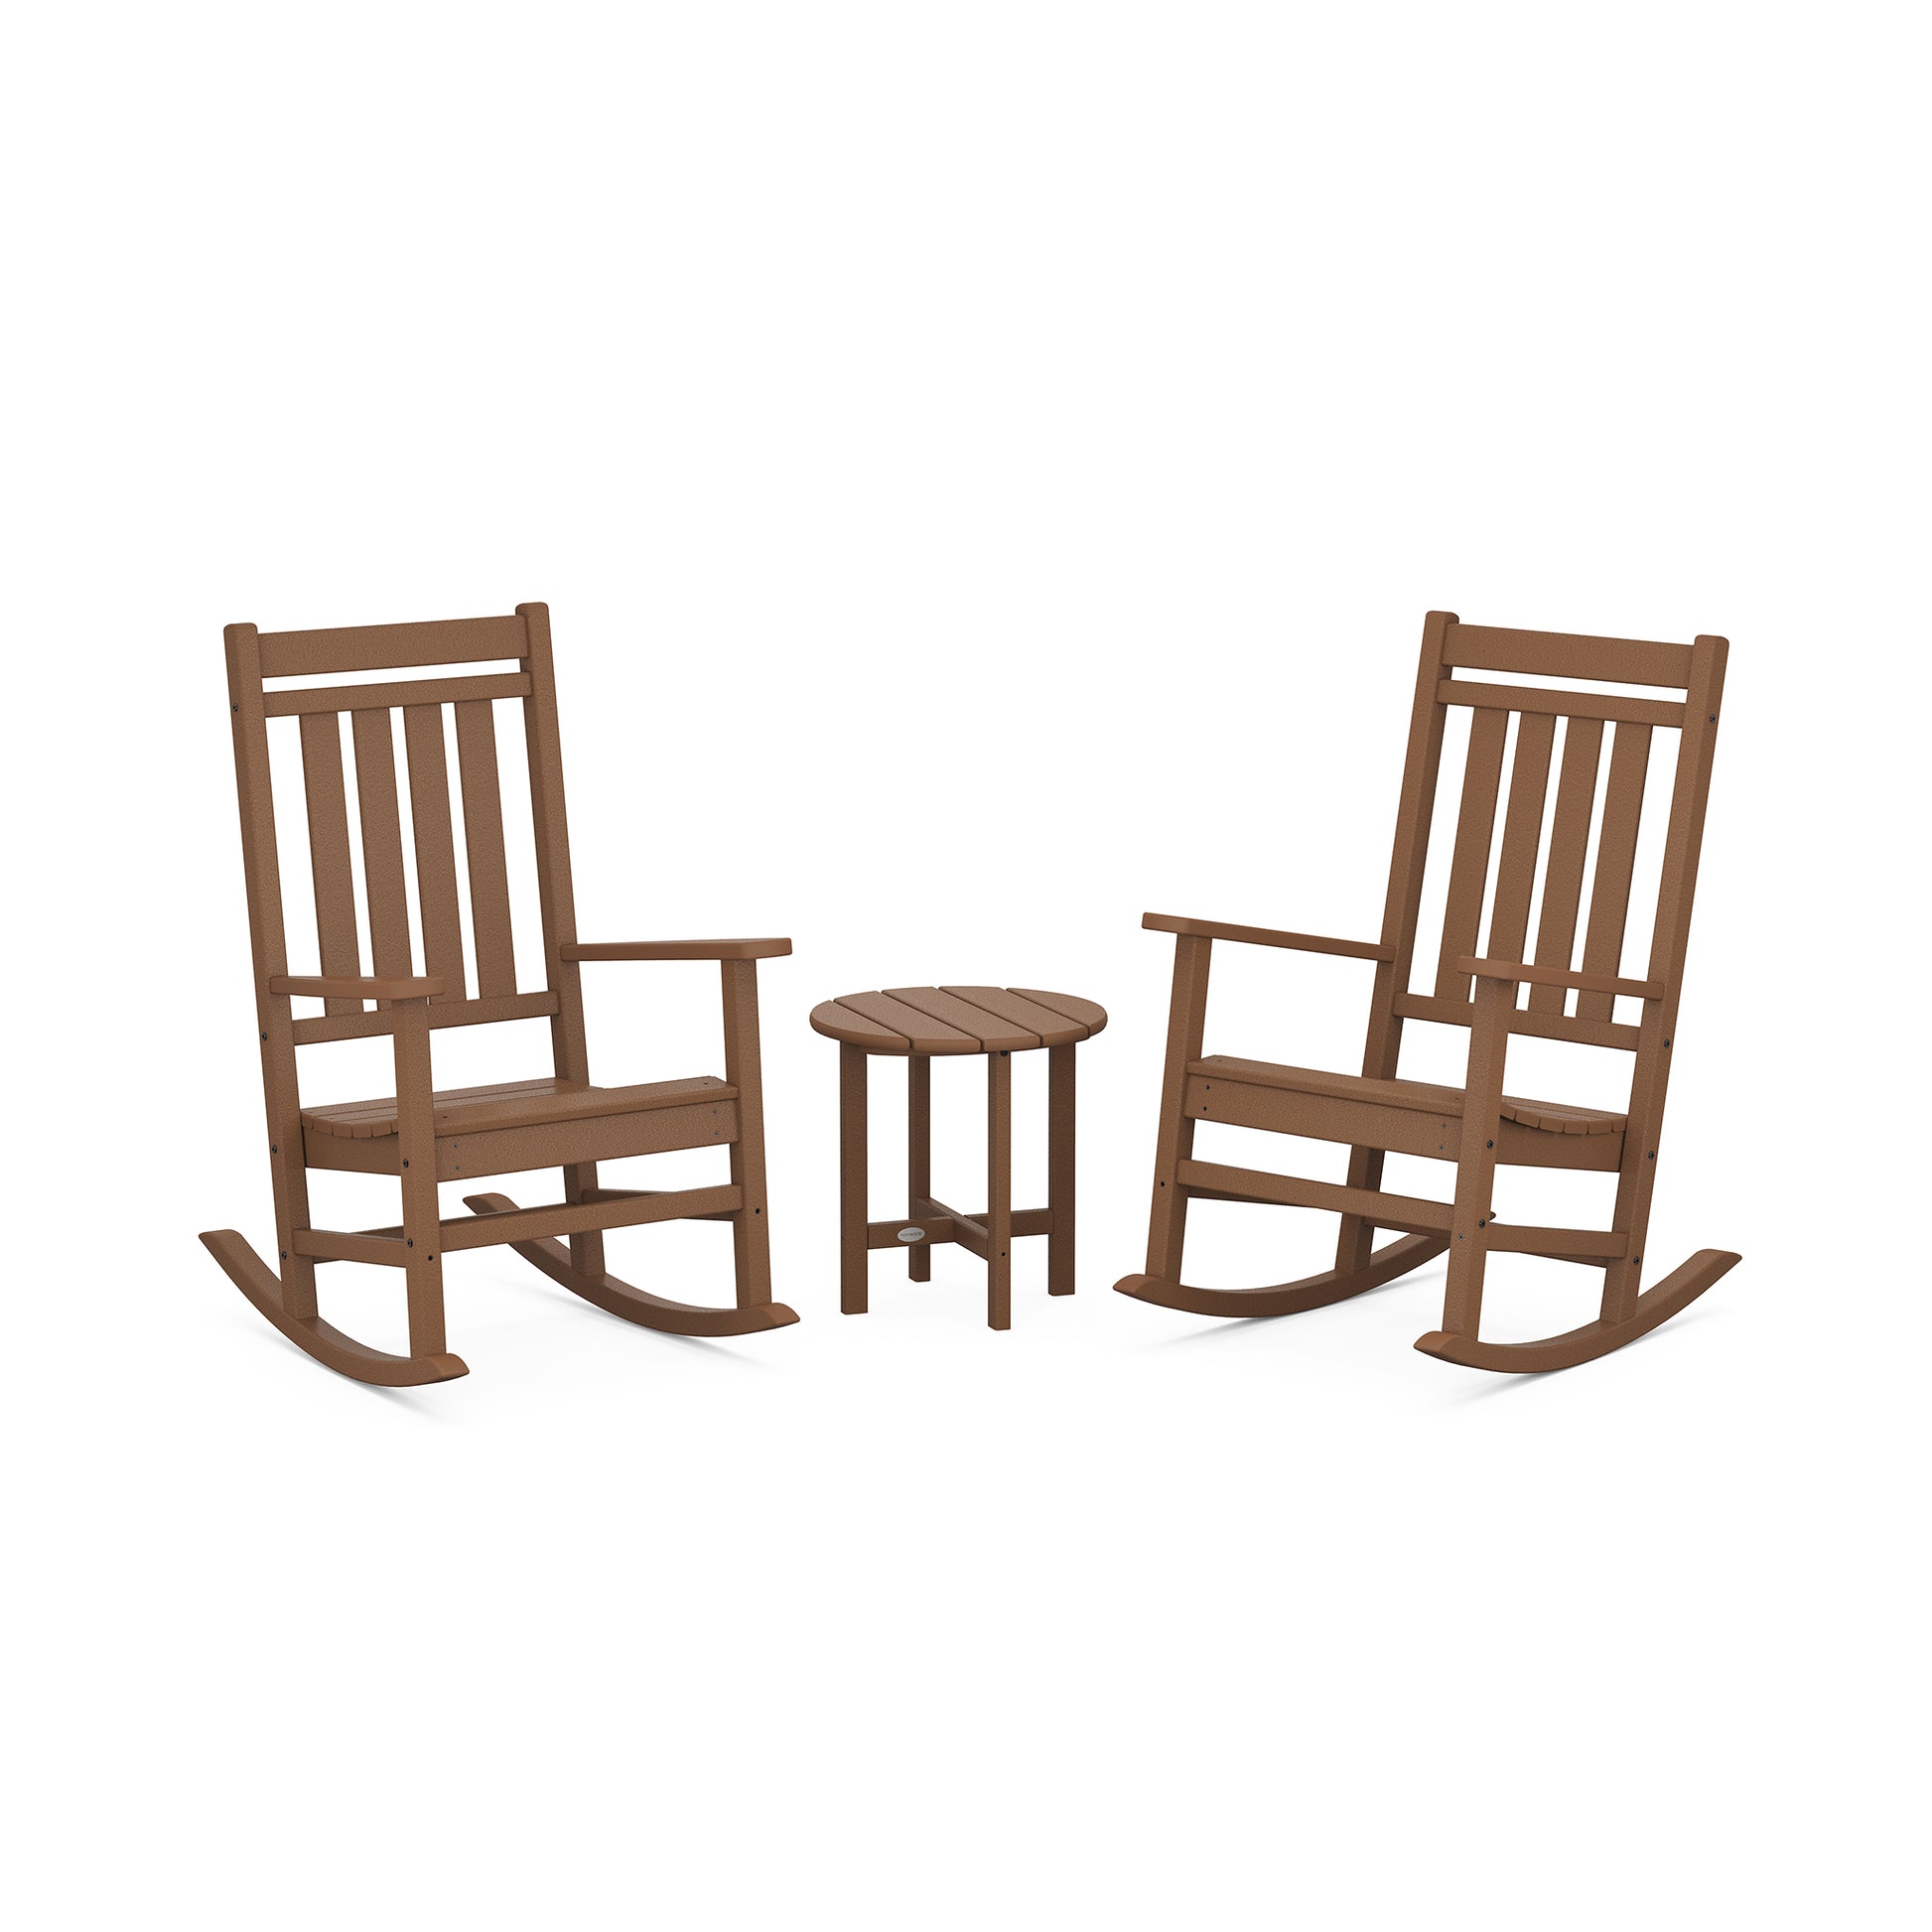 Two POLYWOOD Estate 3-Piece Rocking Chair Sets and a small round table positioned between them on a white background.